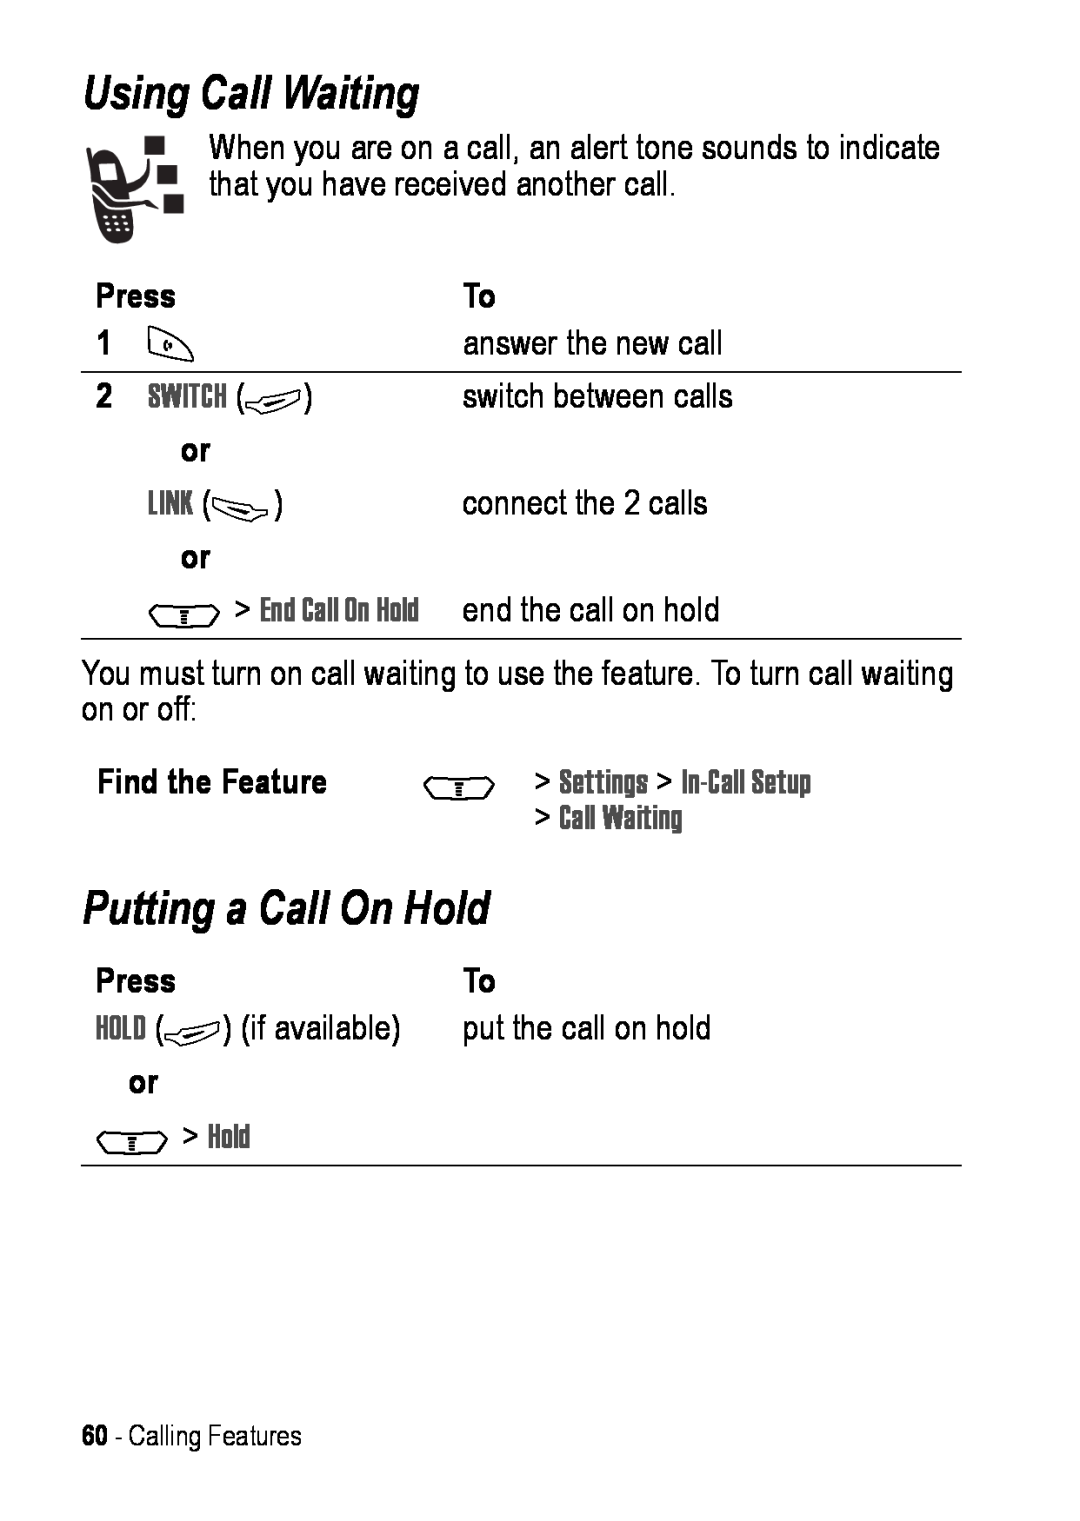 Motorola C390 manual Using Call Waiting, Putting a Call On Hold, Switch +, Link, M Hold, Find the Feature 